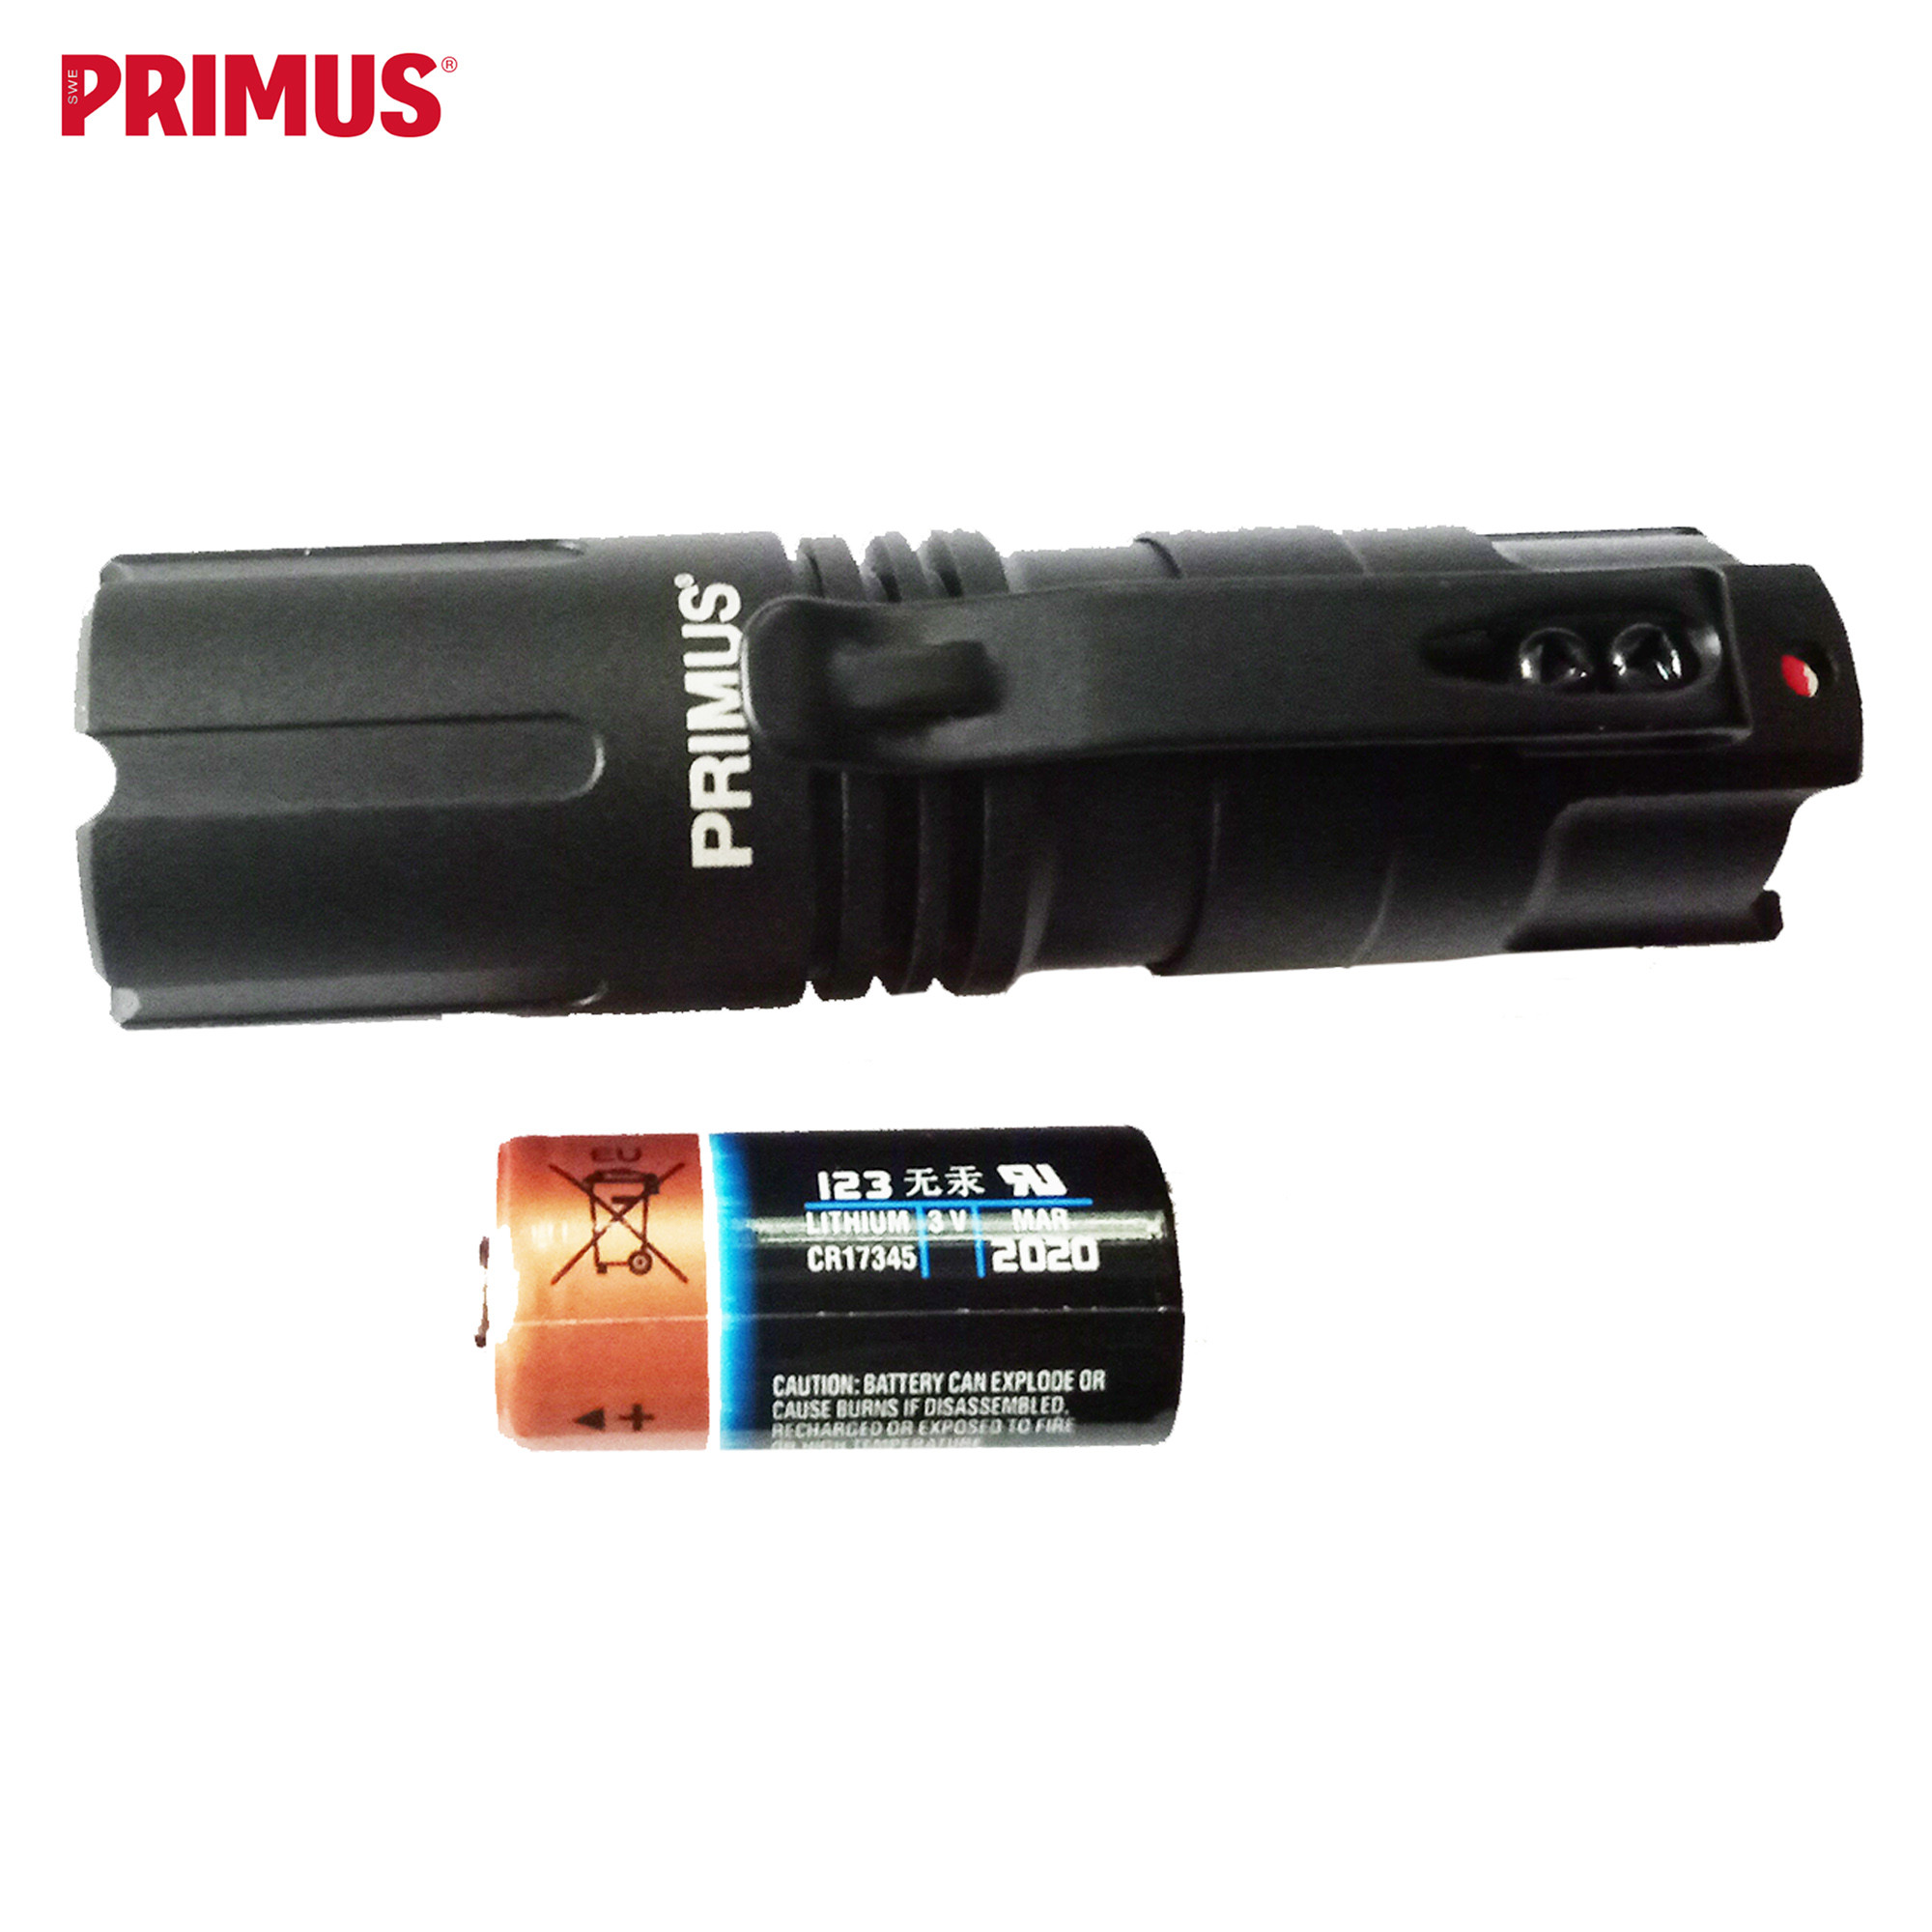 Primus Prime Torch 1010 Flash Light With Tactical Switch Lightweight Portable